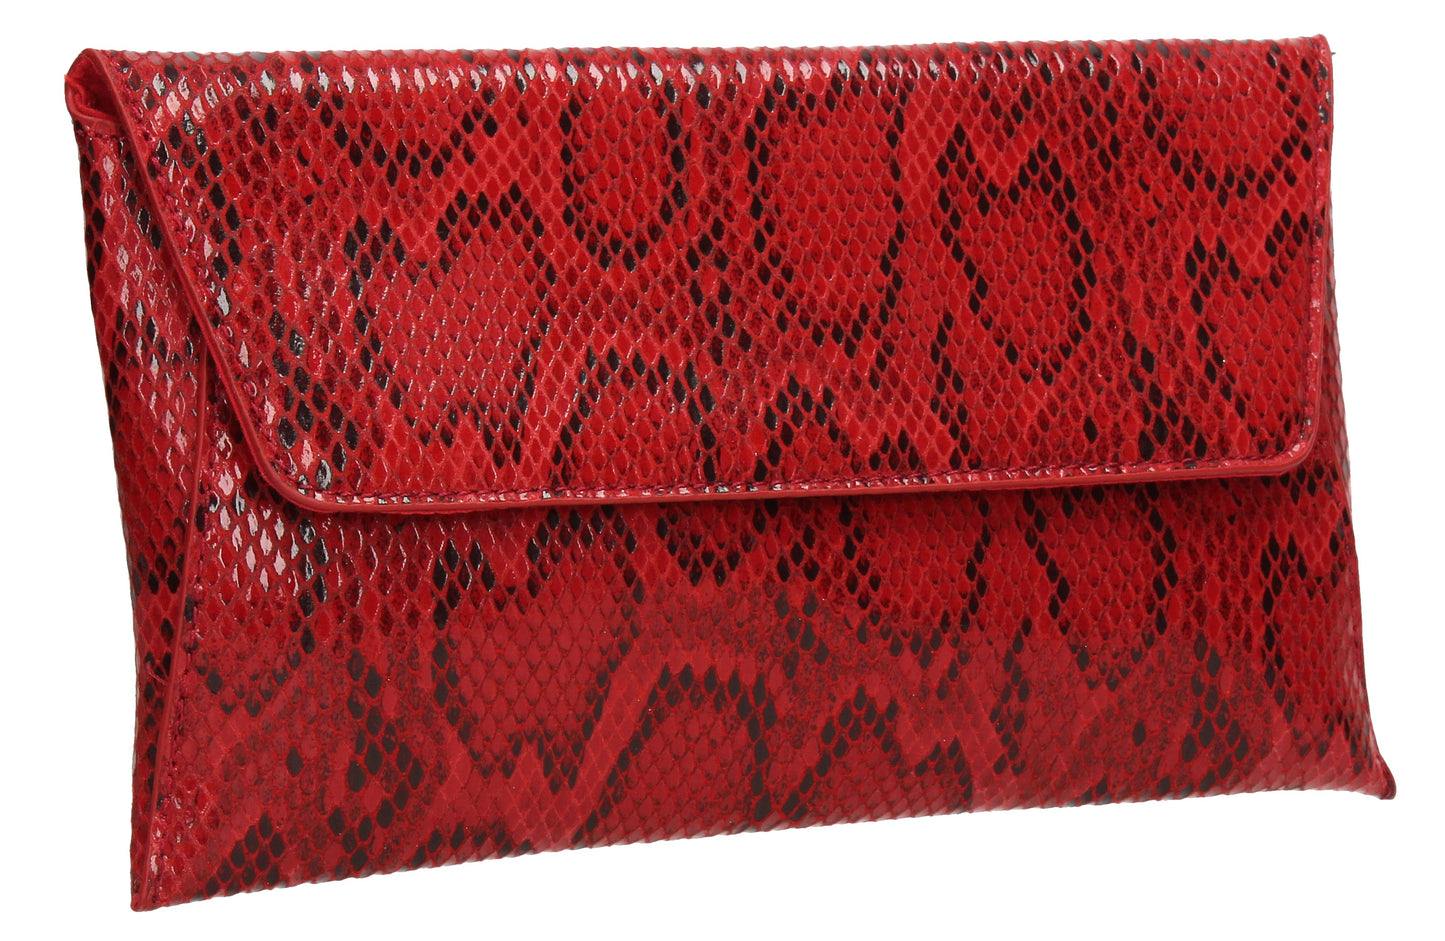 Karla Faux Snakeskin Effect Flapover Clutch Bag Red